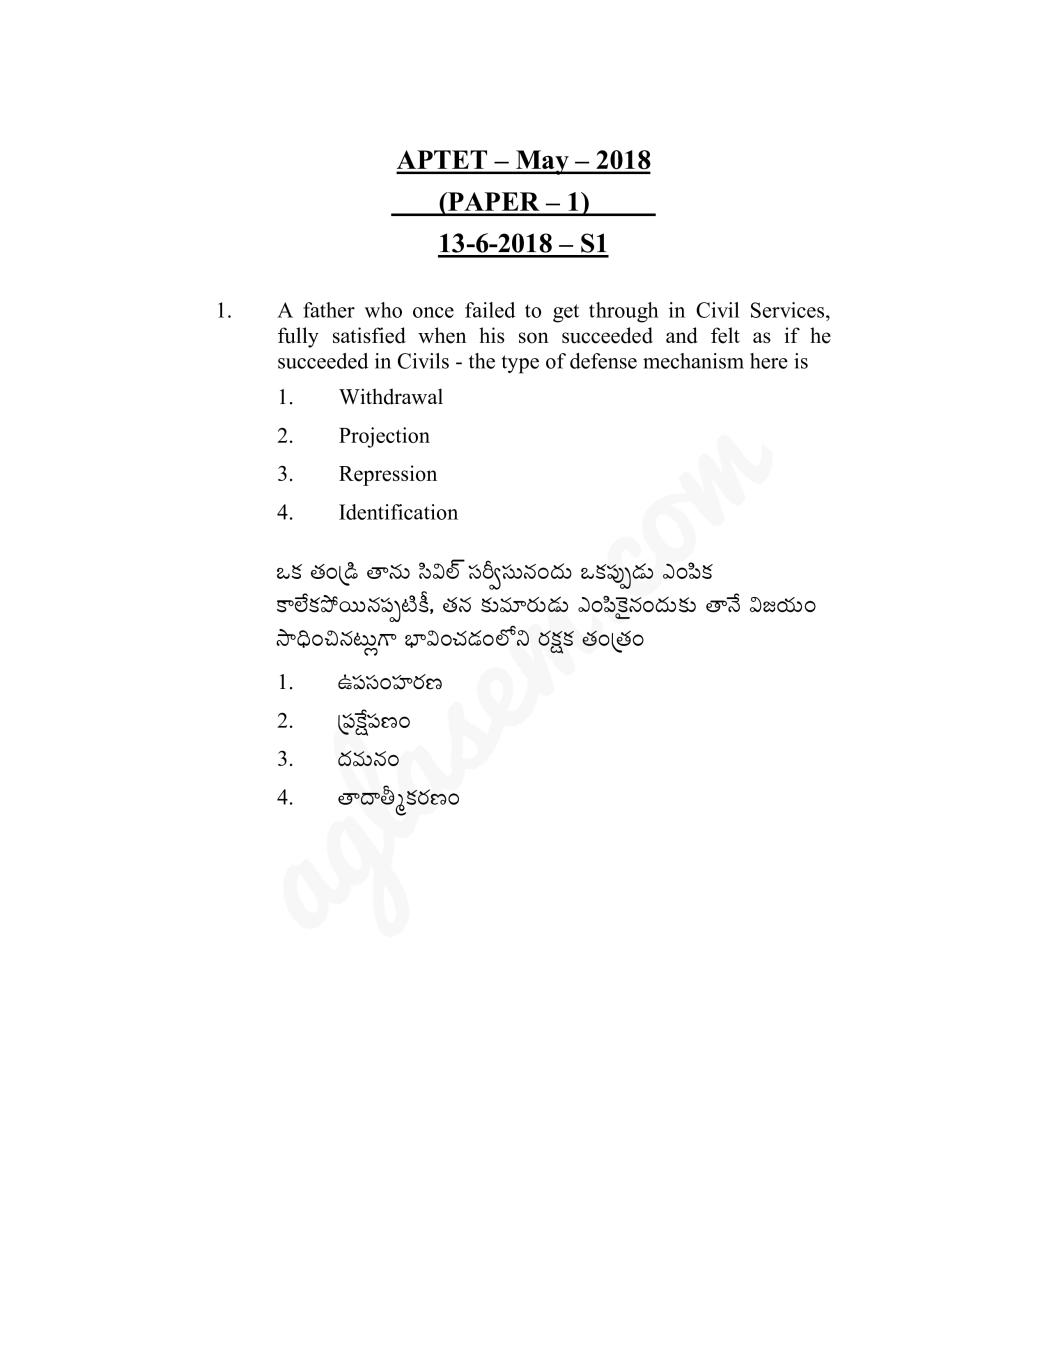 APTET Question Paper with Answers 13 Jun 2018 Paper 1 (Shift 1) - Page 1